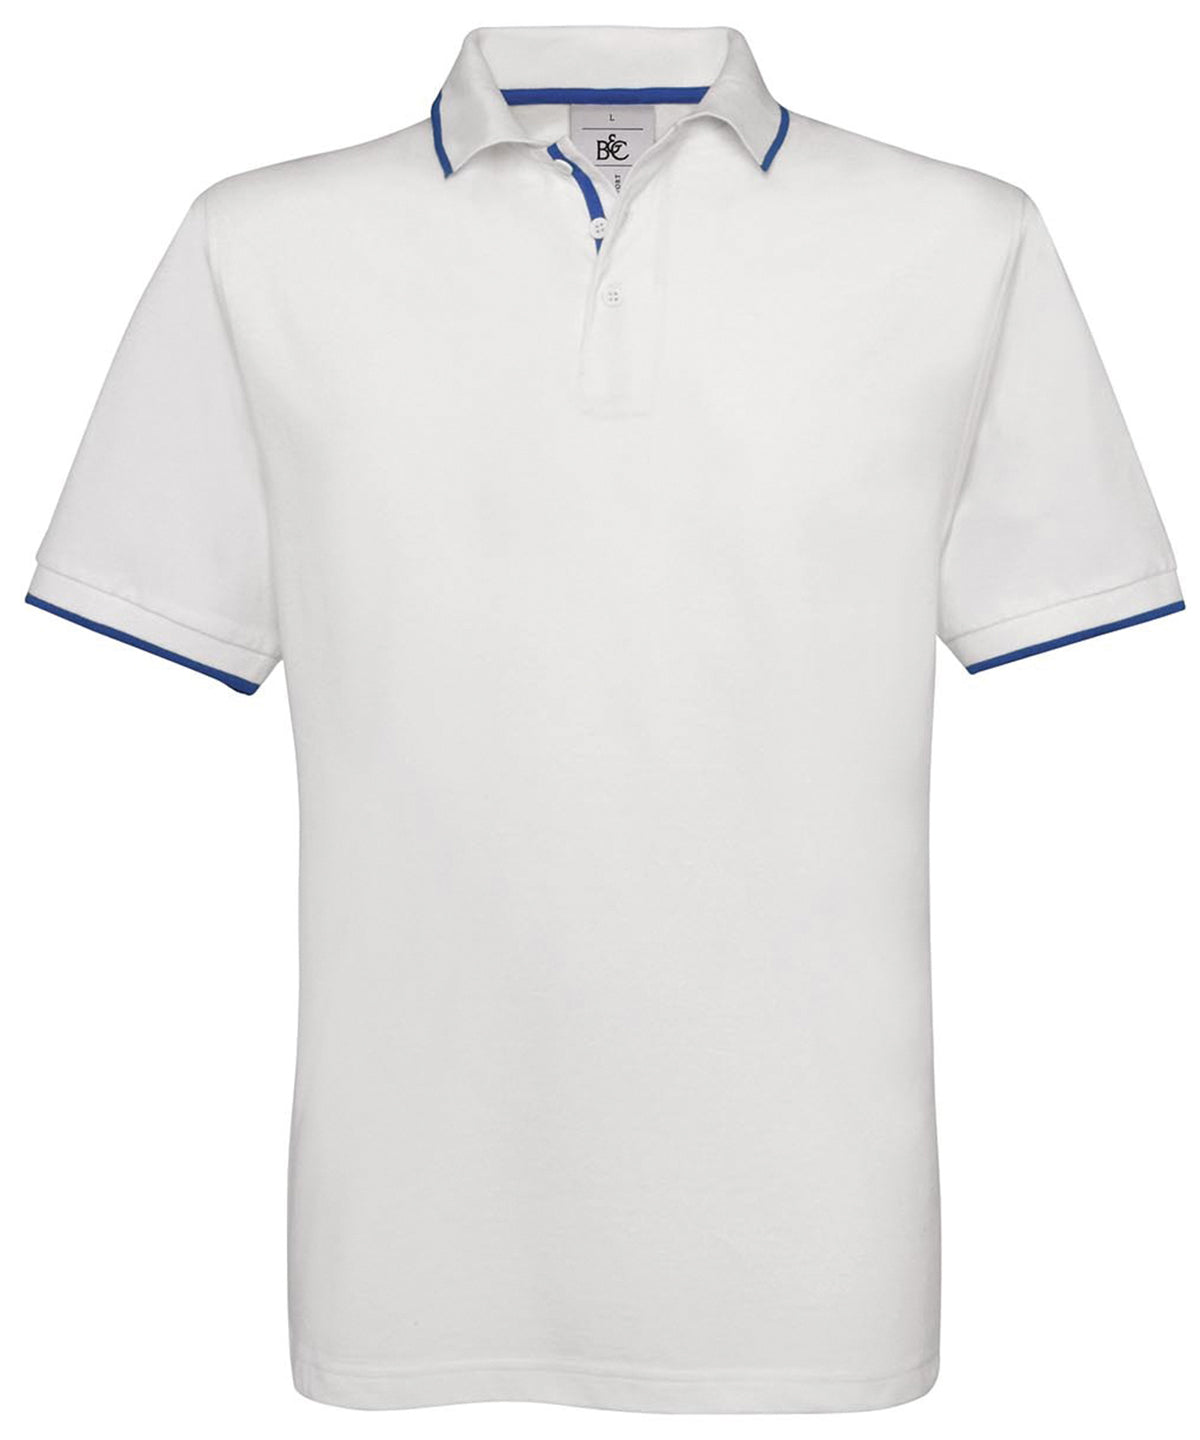 Personalised Polo Shirts - Navy B&C Collection B&C Safran sport